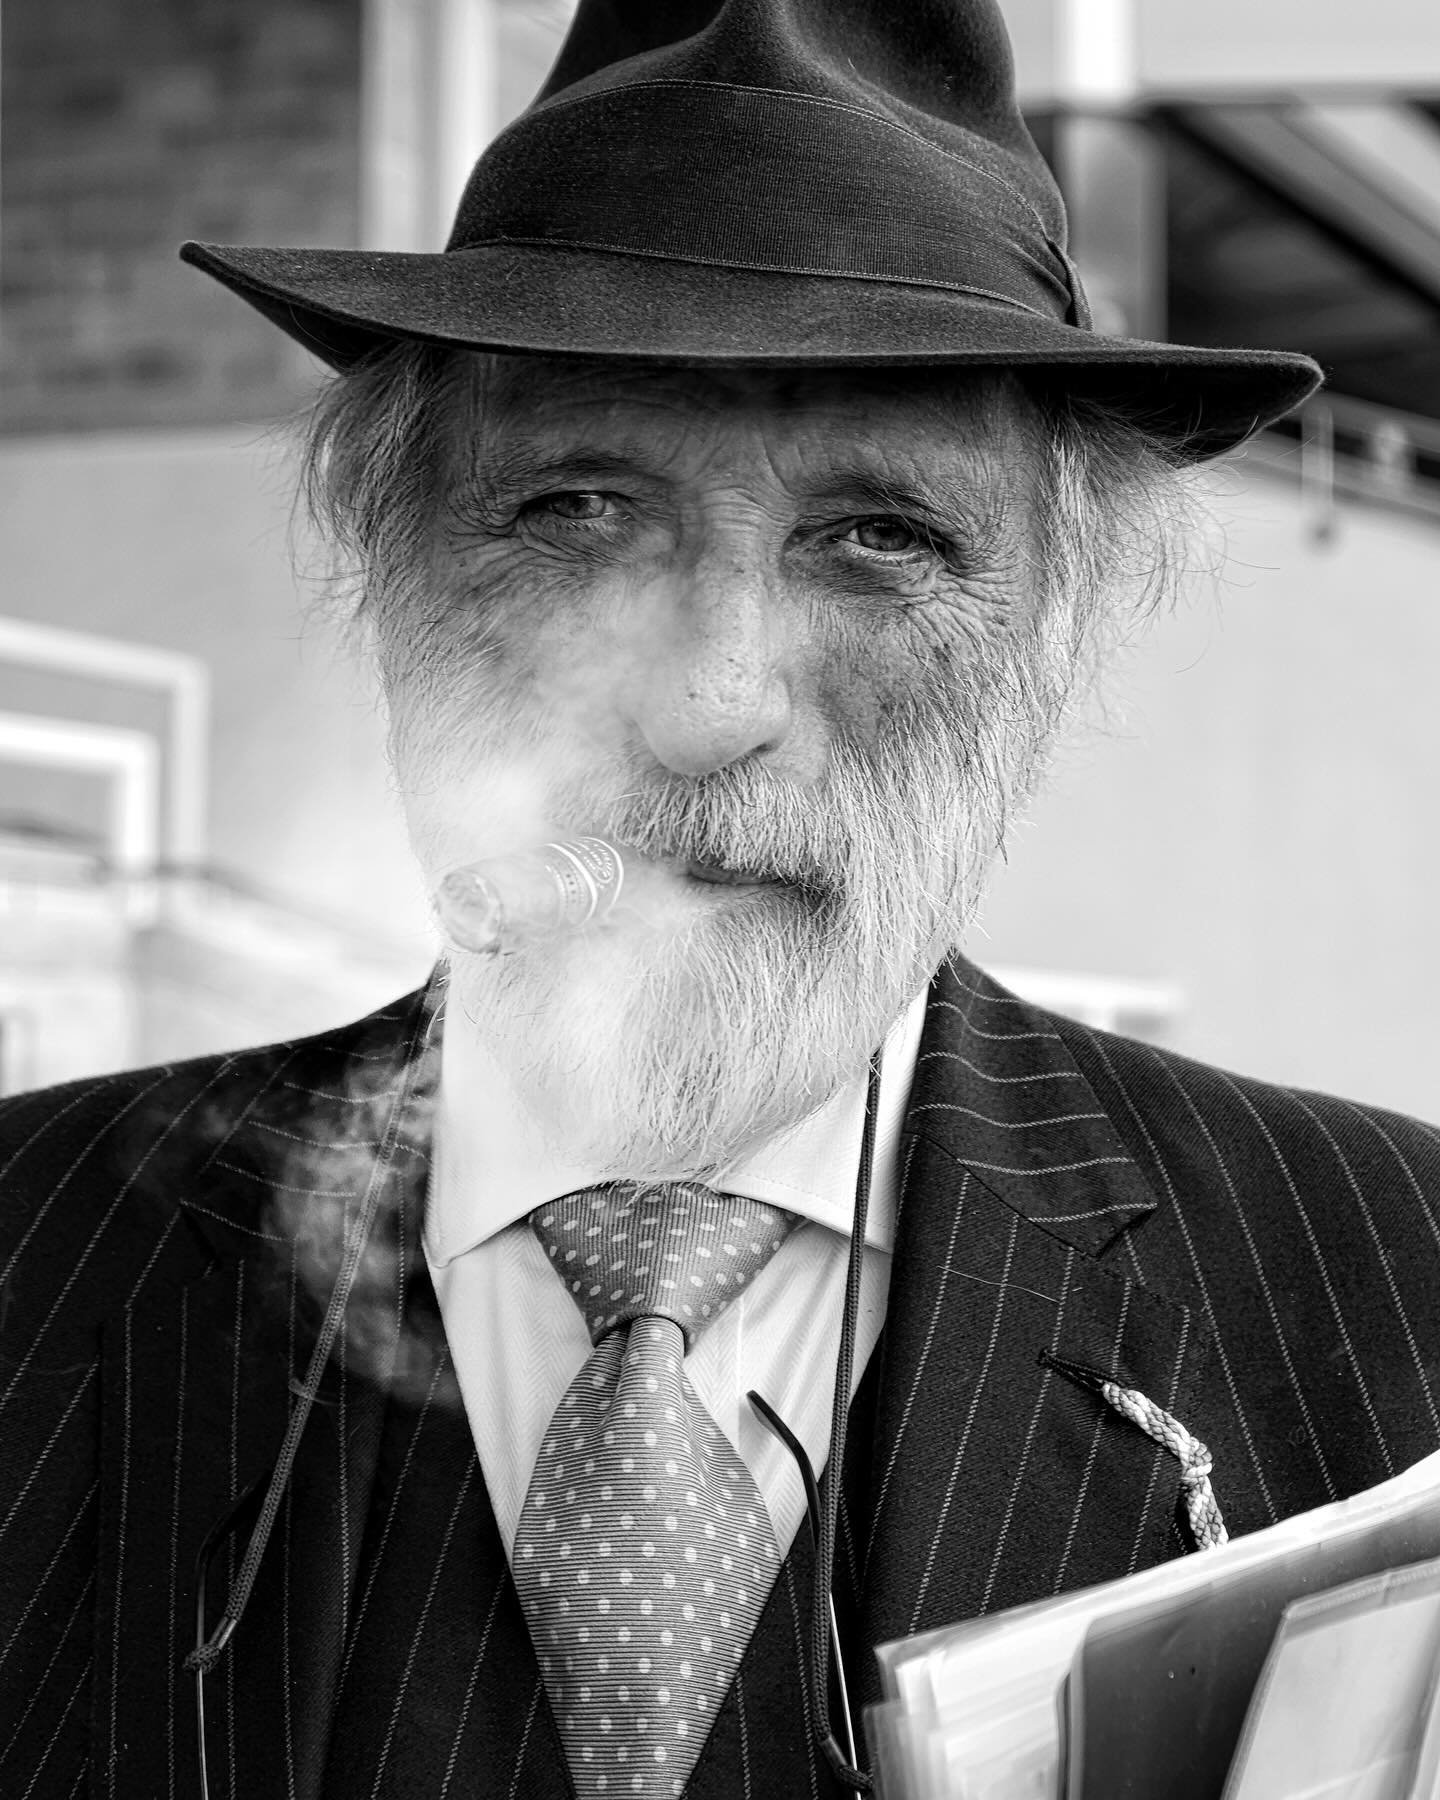 So last year I photographed this lovely chap at the Guineas with his sharp suit and cigar, and when I saw him again this year I decided to introduce myself to him, have a chat and ask if I could take a quick portrait. This is Peter.